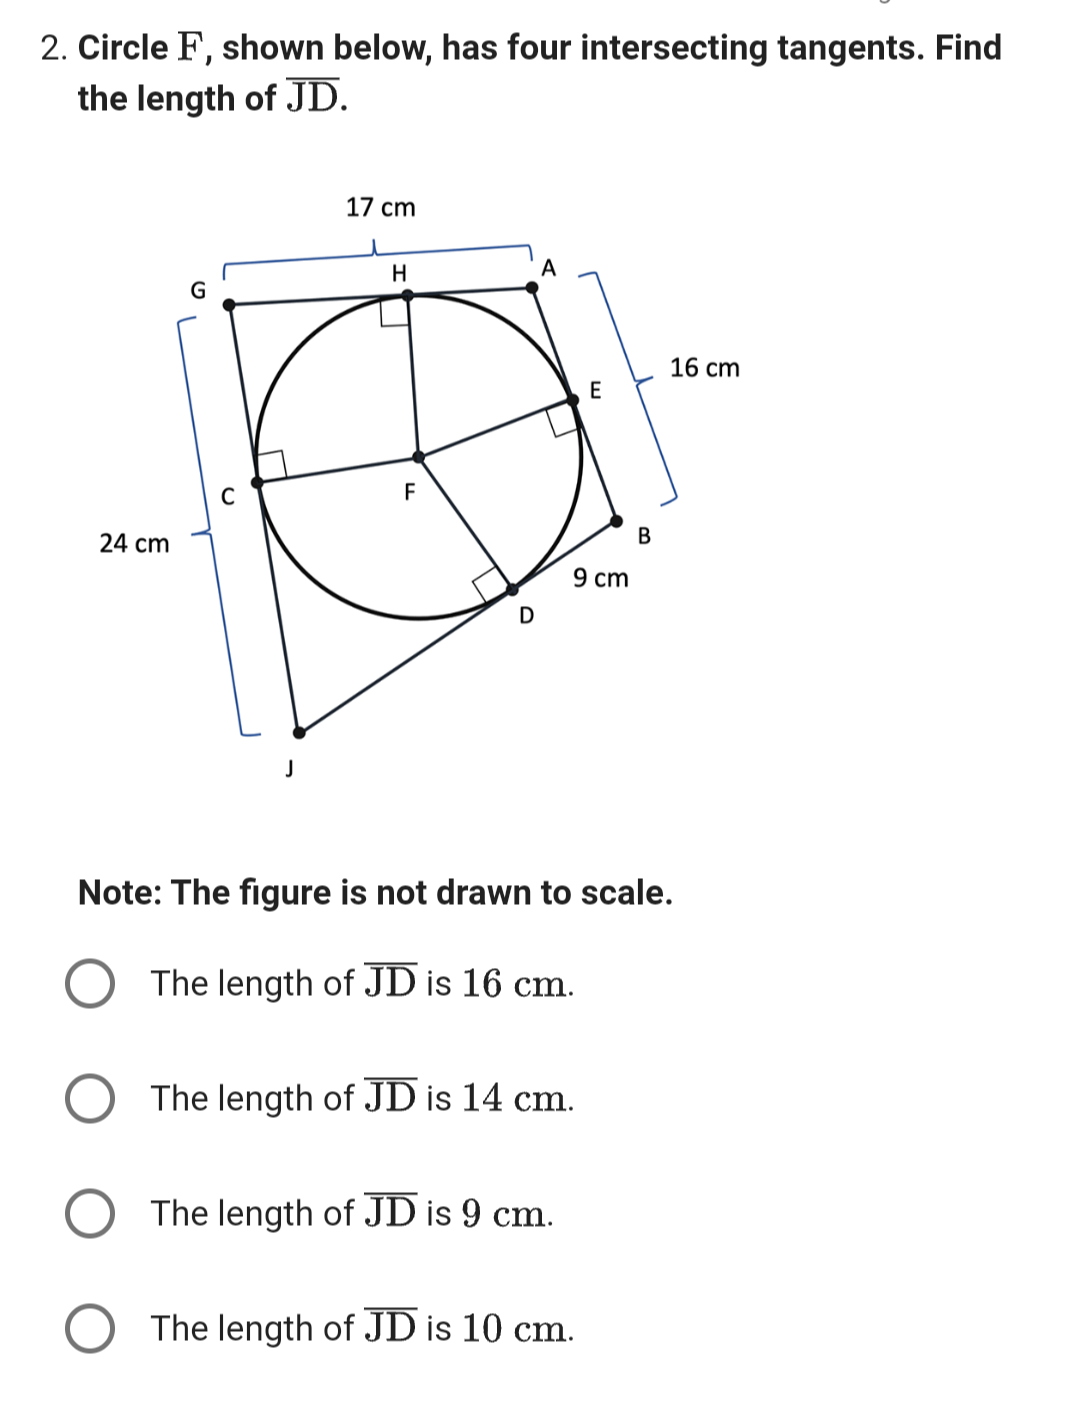 2. Circle F, shown below, has four intersecting tangents. Find
the length of JD.
24 cm
J
17 cm
H
F
D
9 cm
The length of JD is 14 cm.
The length of JD is 9 cm.
E
Note: The figure is not drawn to scale.
The length of JD is 16 cm.
The length of JD is 10 cm.
B
16 cm